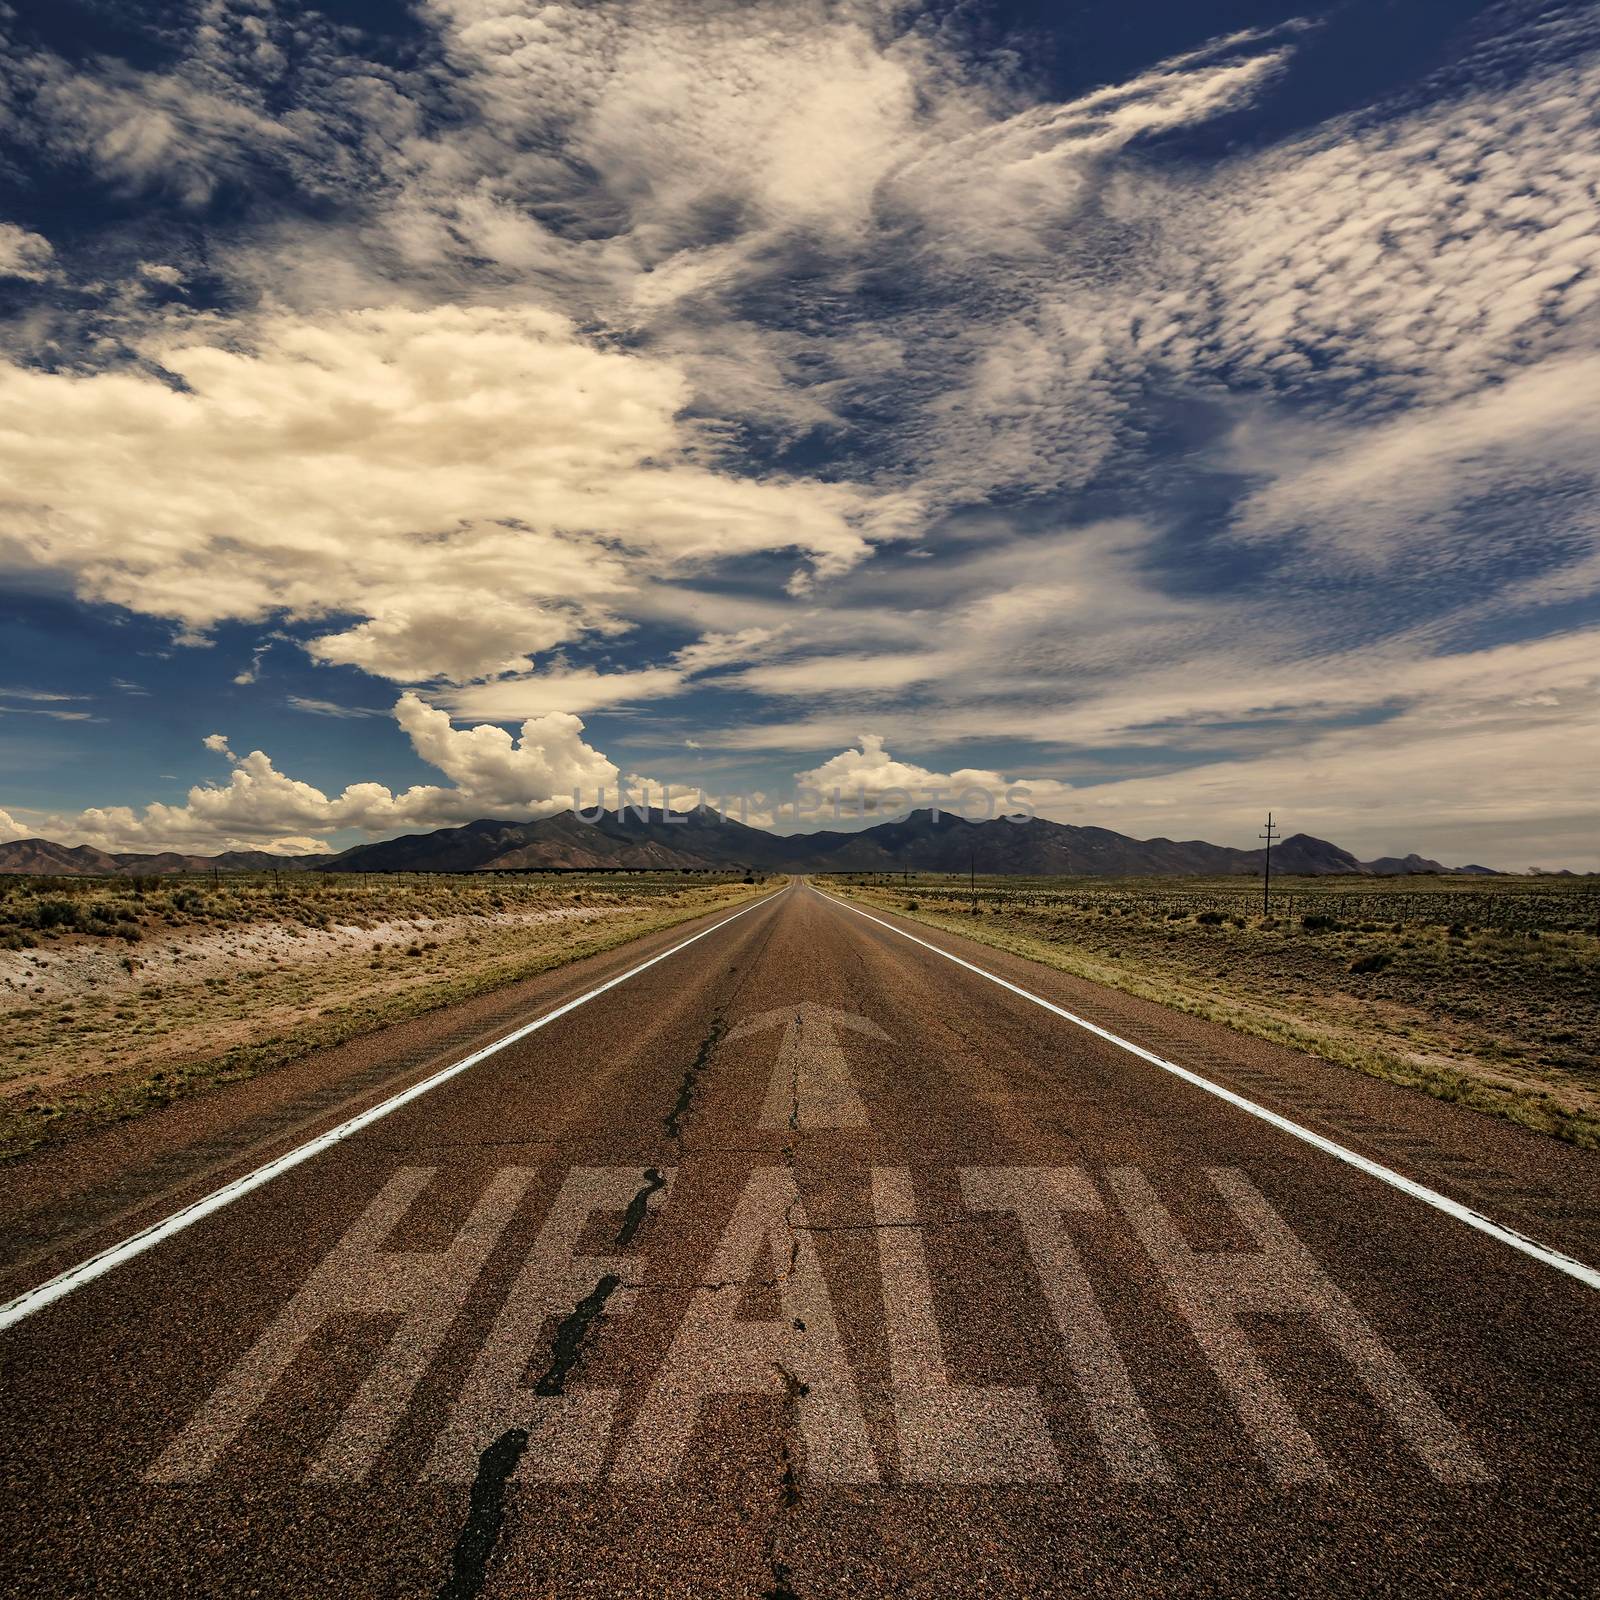 Conceptual image of desert road with the word health and arrow